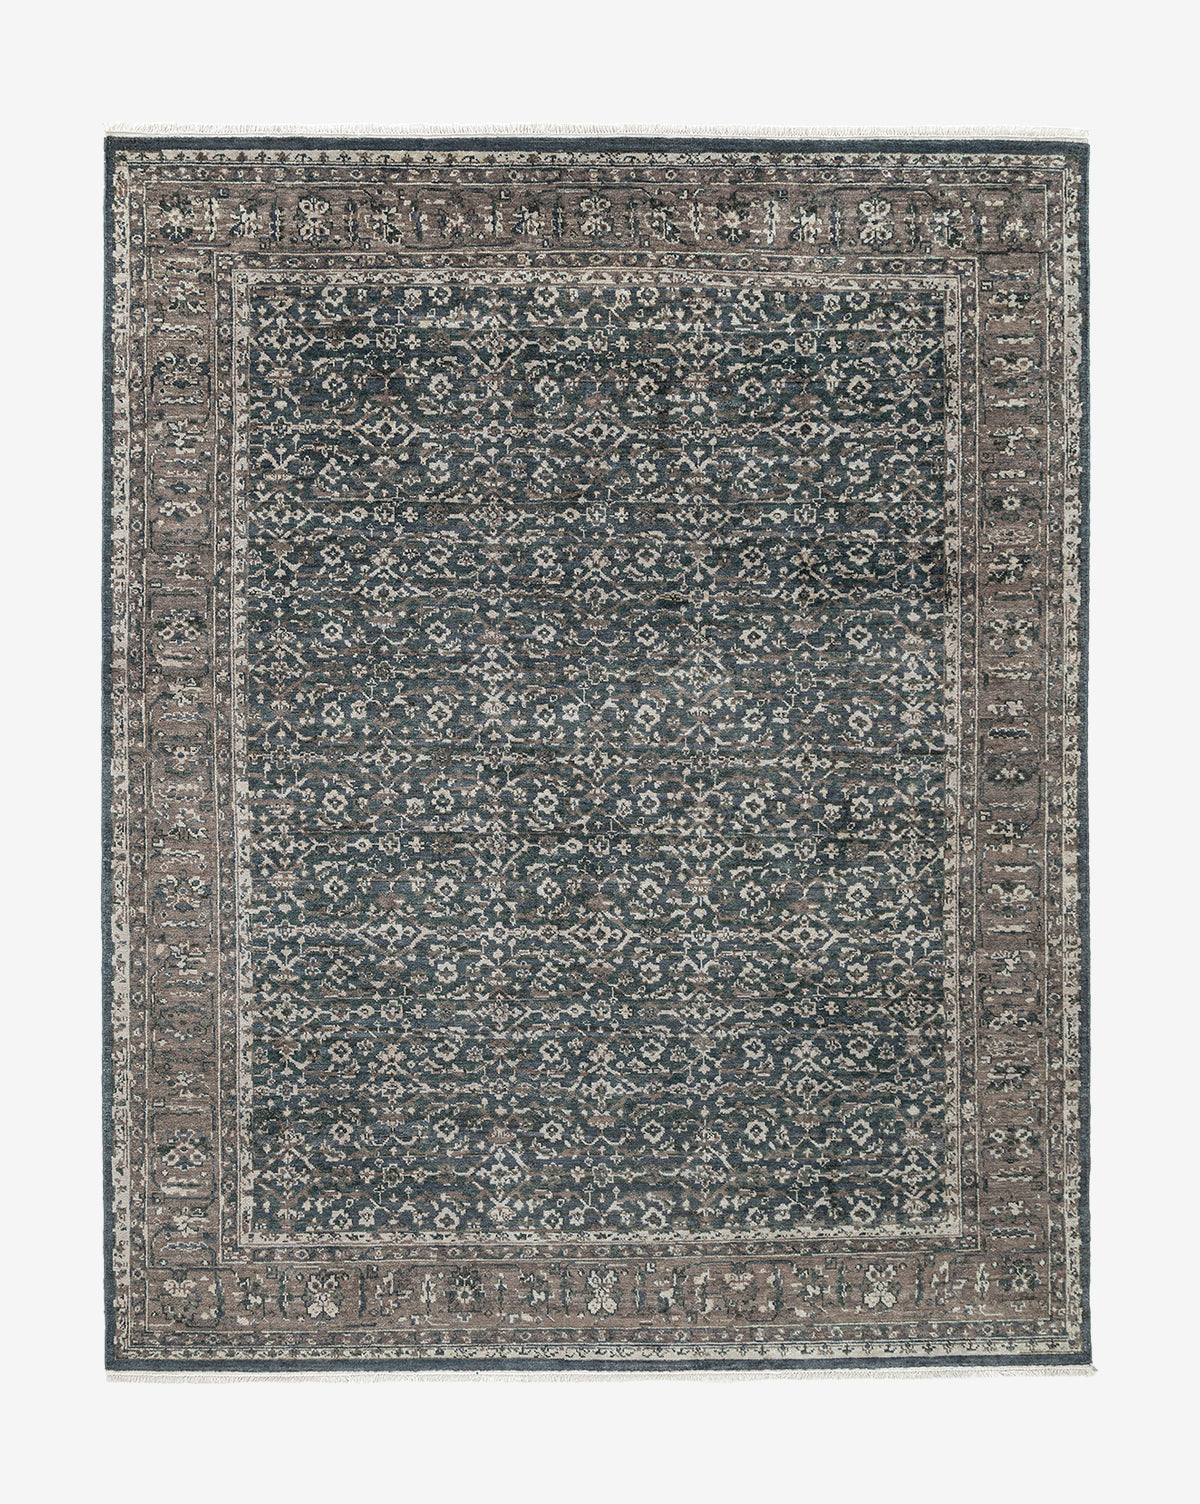 Obeetee, Marta Hand-Knotted Wool Rug